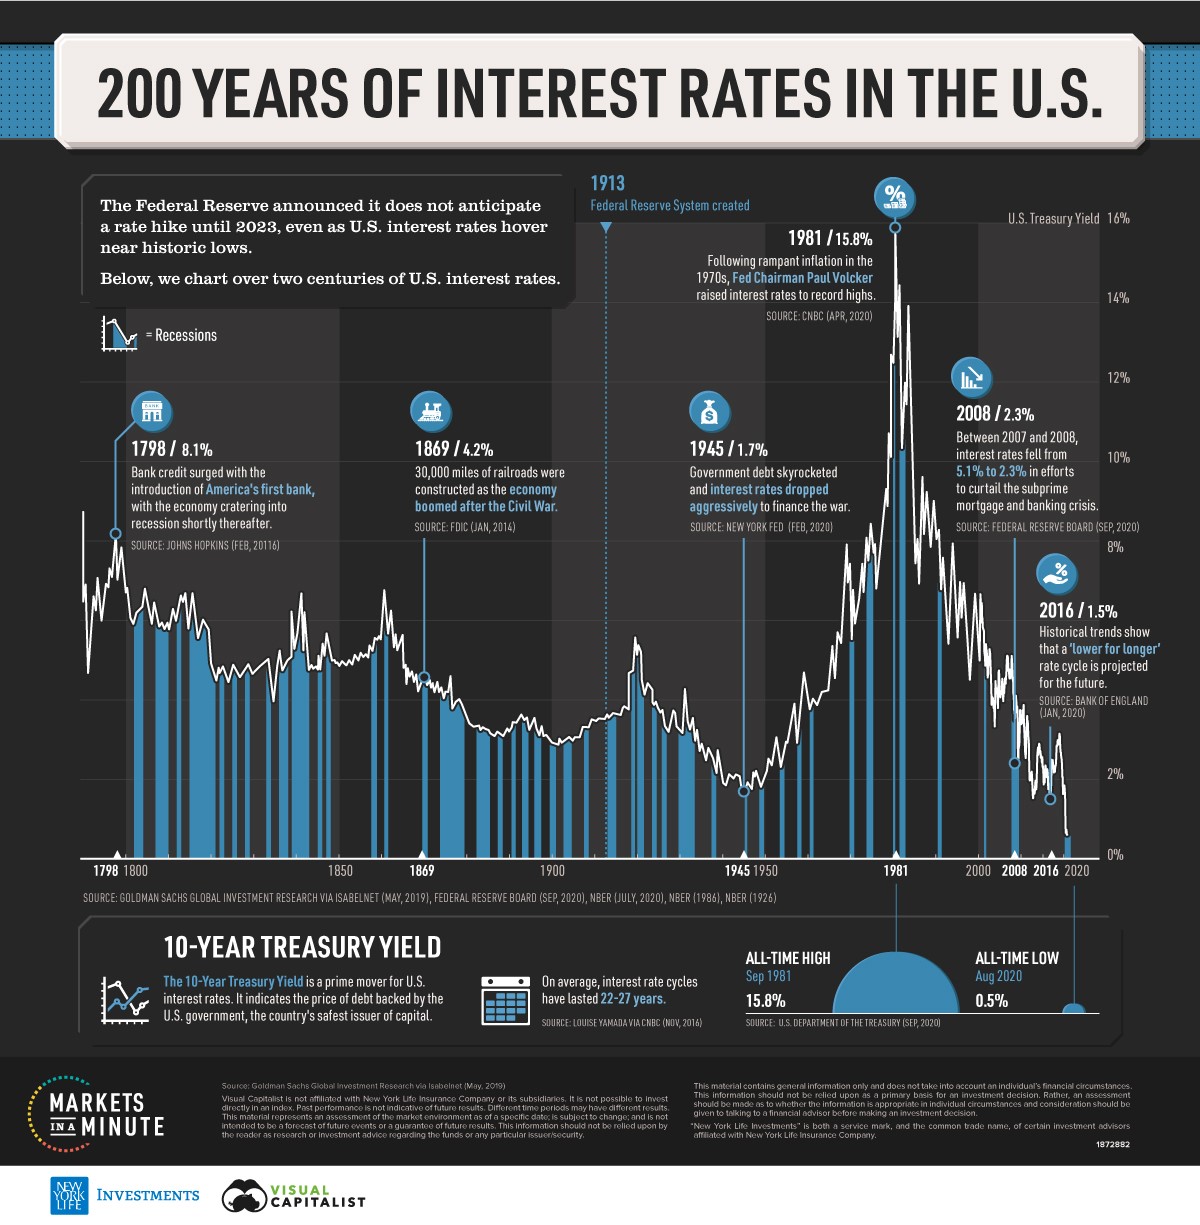 200 YEARS OF INTEREST RATES IN THE U.S